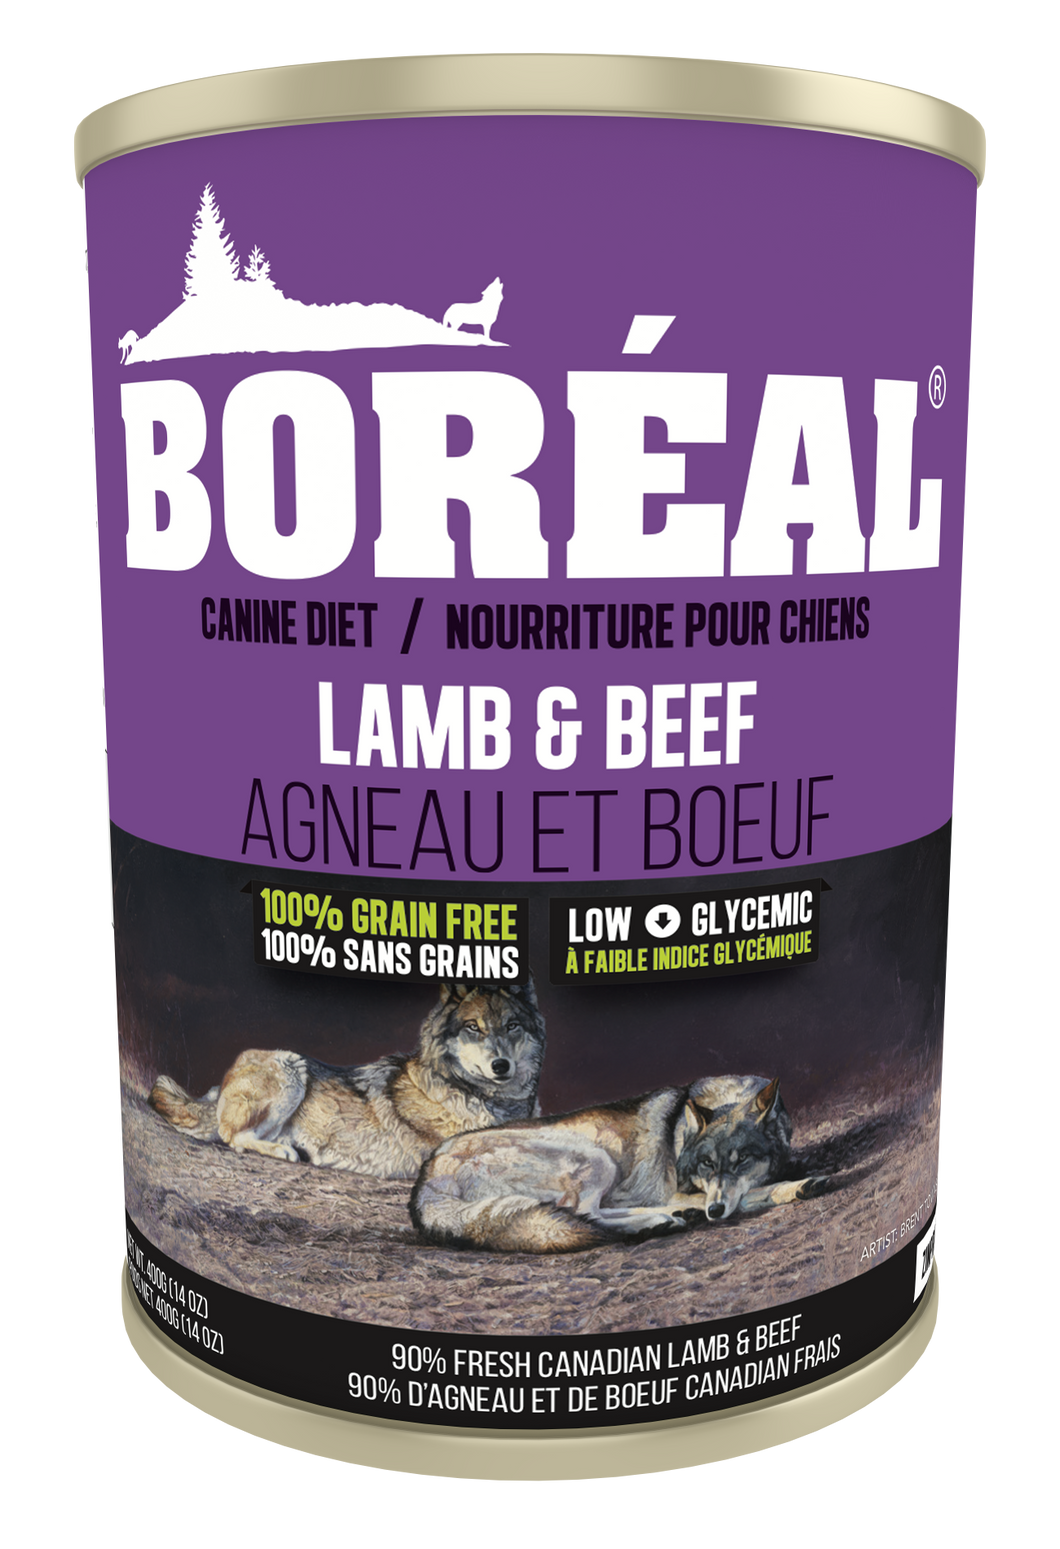 Boréal - Big Bear Lamb & Beef Dog Food - All Breed - Joint Support - Glucosamine Fortified - Low Glycemic - Limited Carbs - Potato Free - Made in Canada